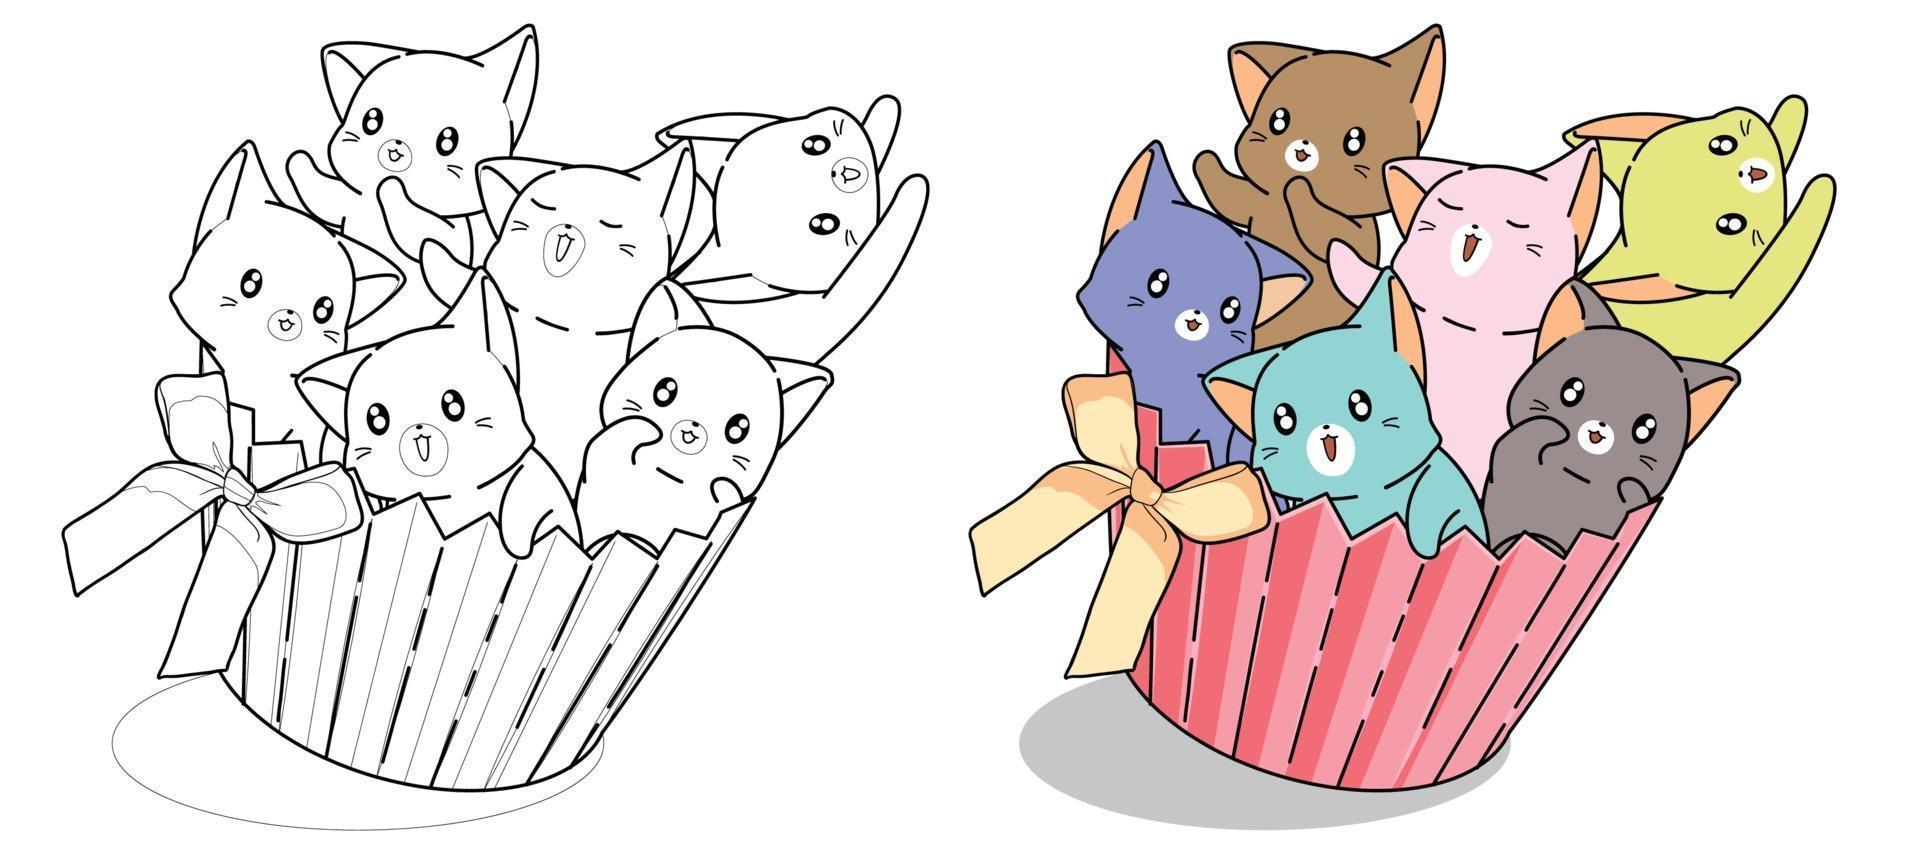 Naughty cats in cup cake with bow cartoon coloring page for kids vector